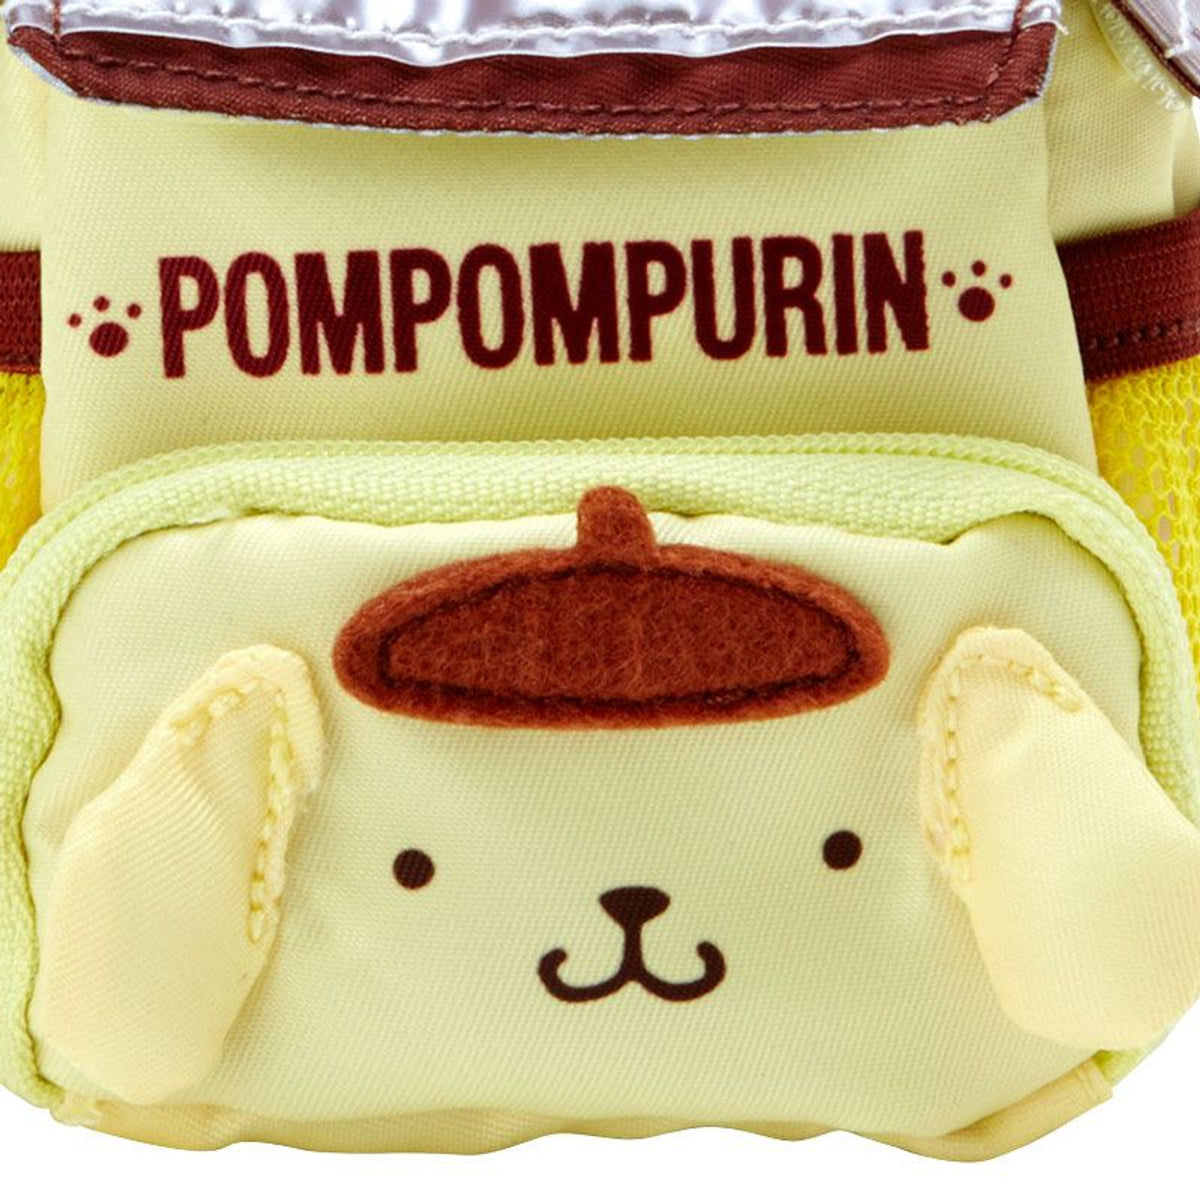 Pompompurin Keychain Pouch (Food Delivery Series) Accessory Japan Original   